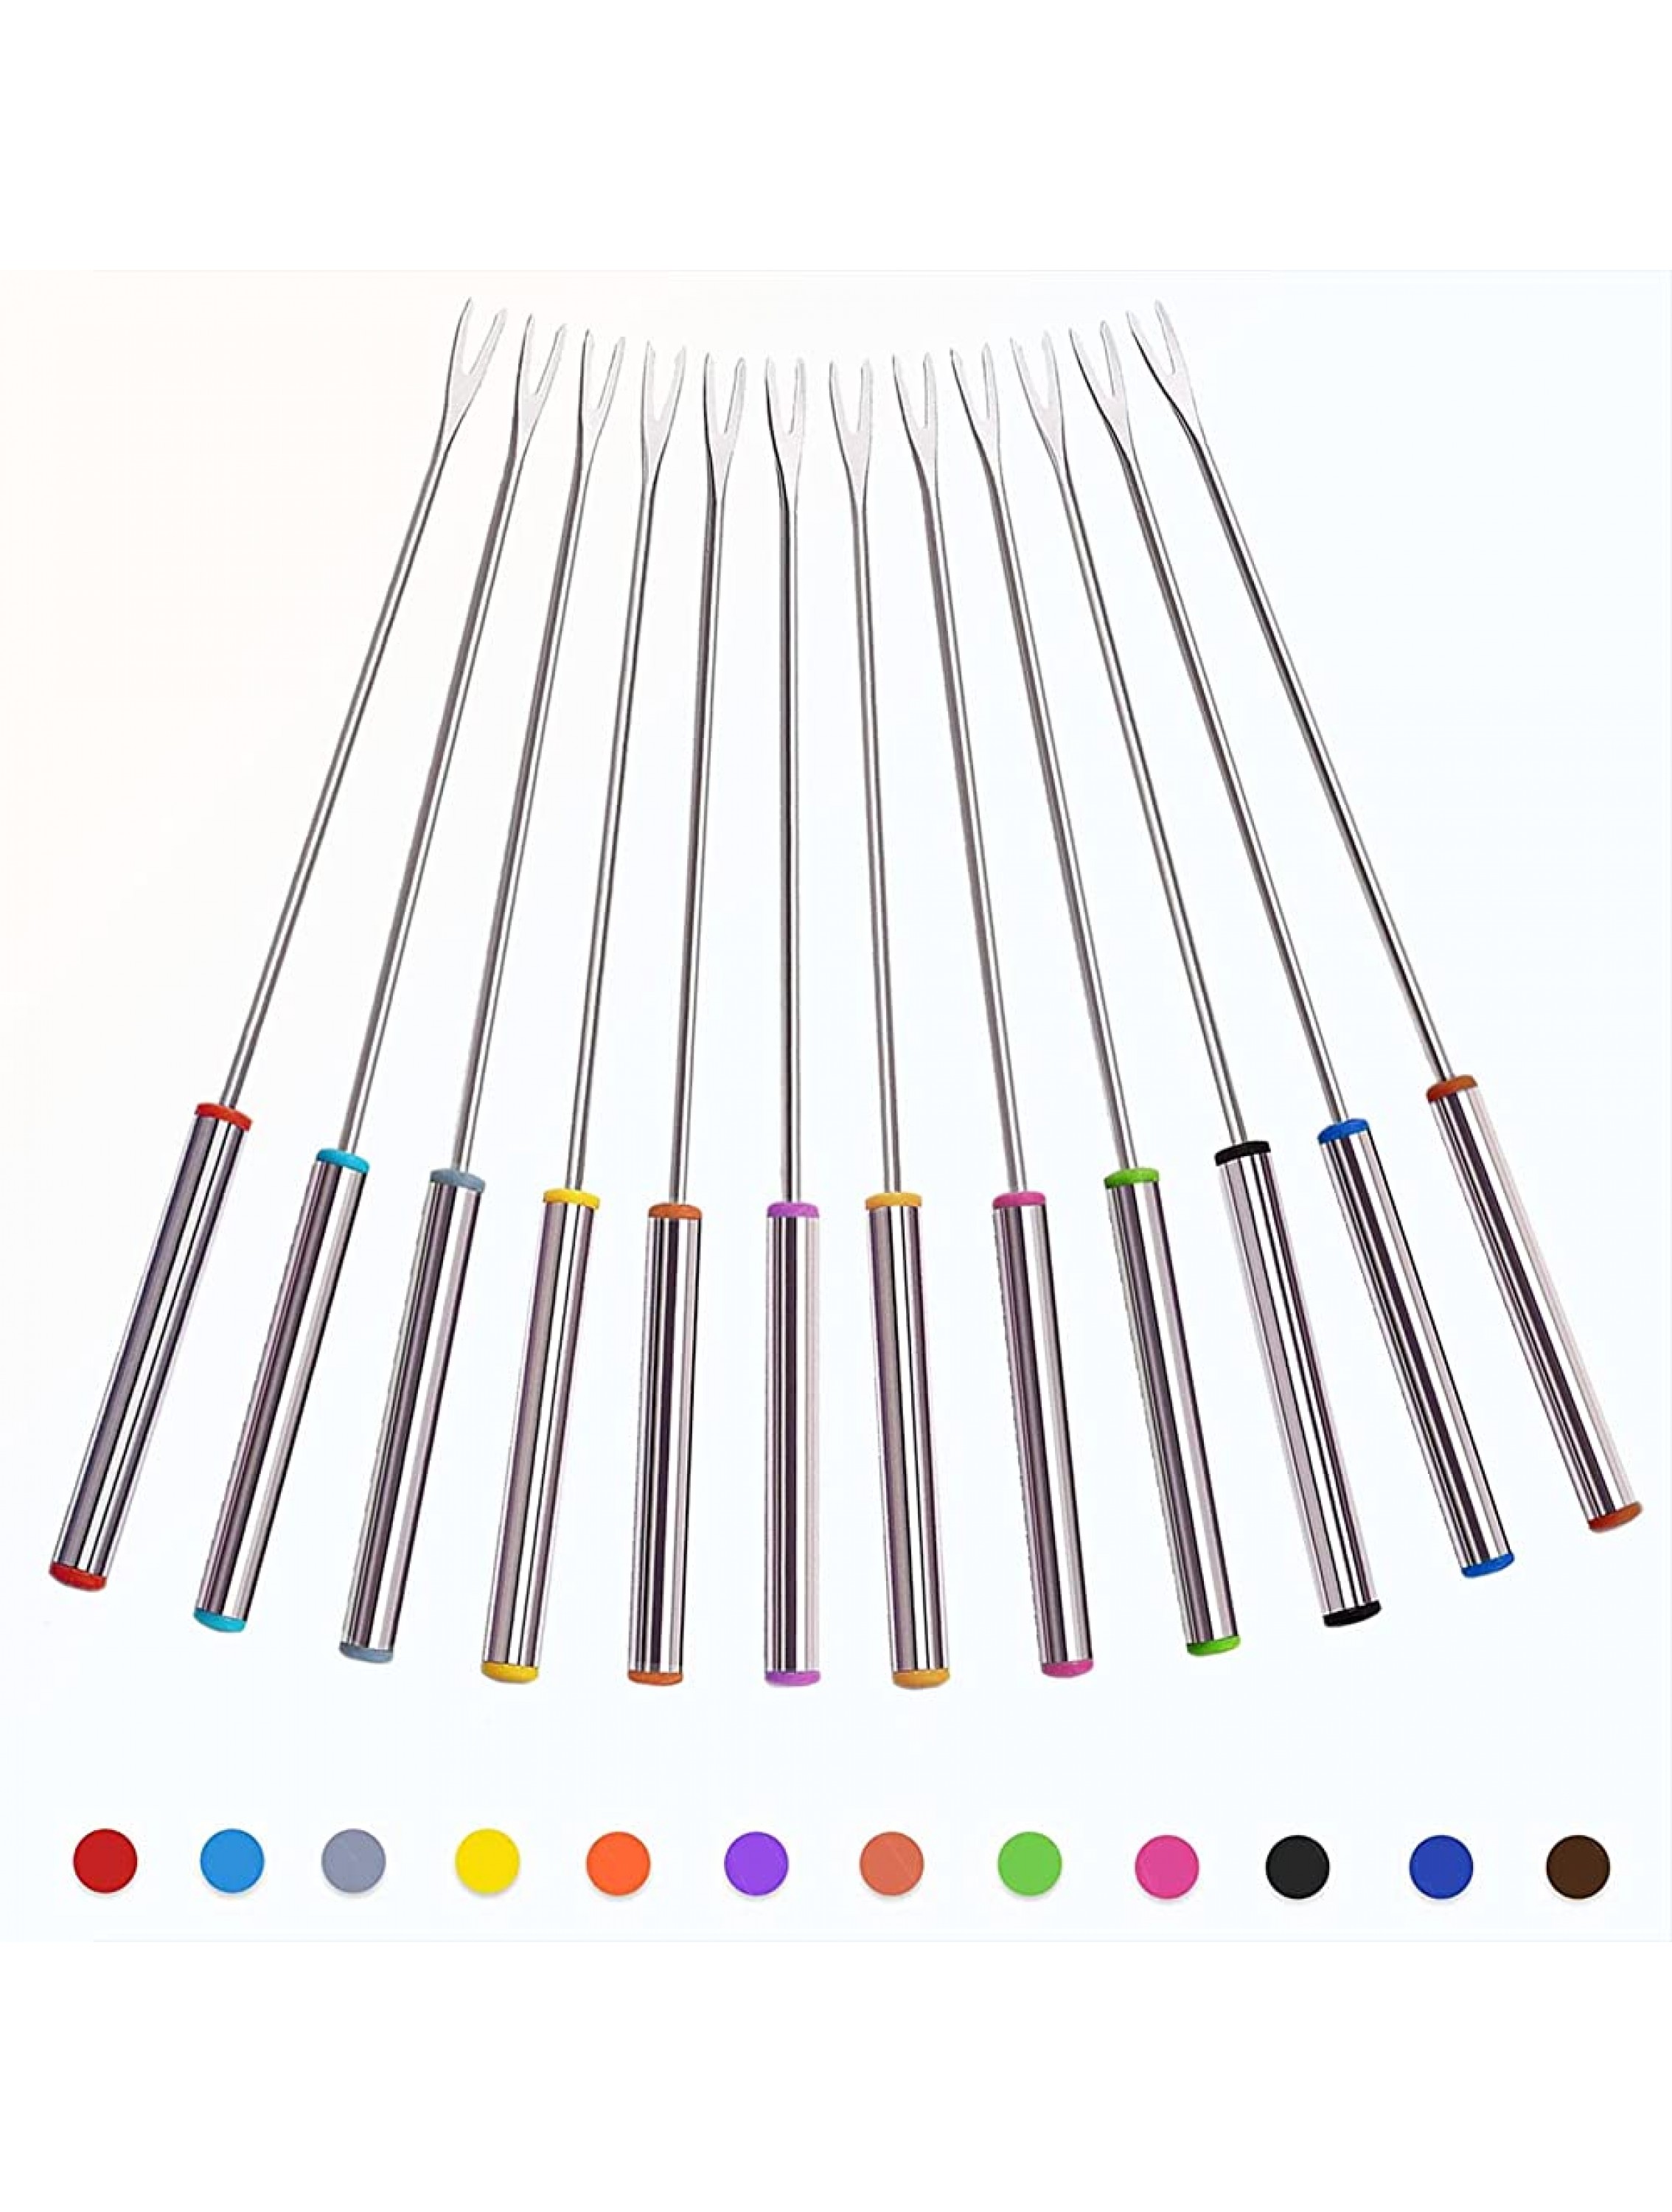 Fondue Forks Set 12 Color Coding Stainless Steel Meat Forks with Heat Resistant Handle Length 9.5 inch - BUYMYCGMR